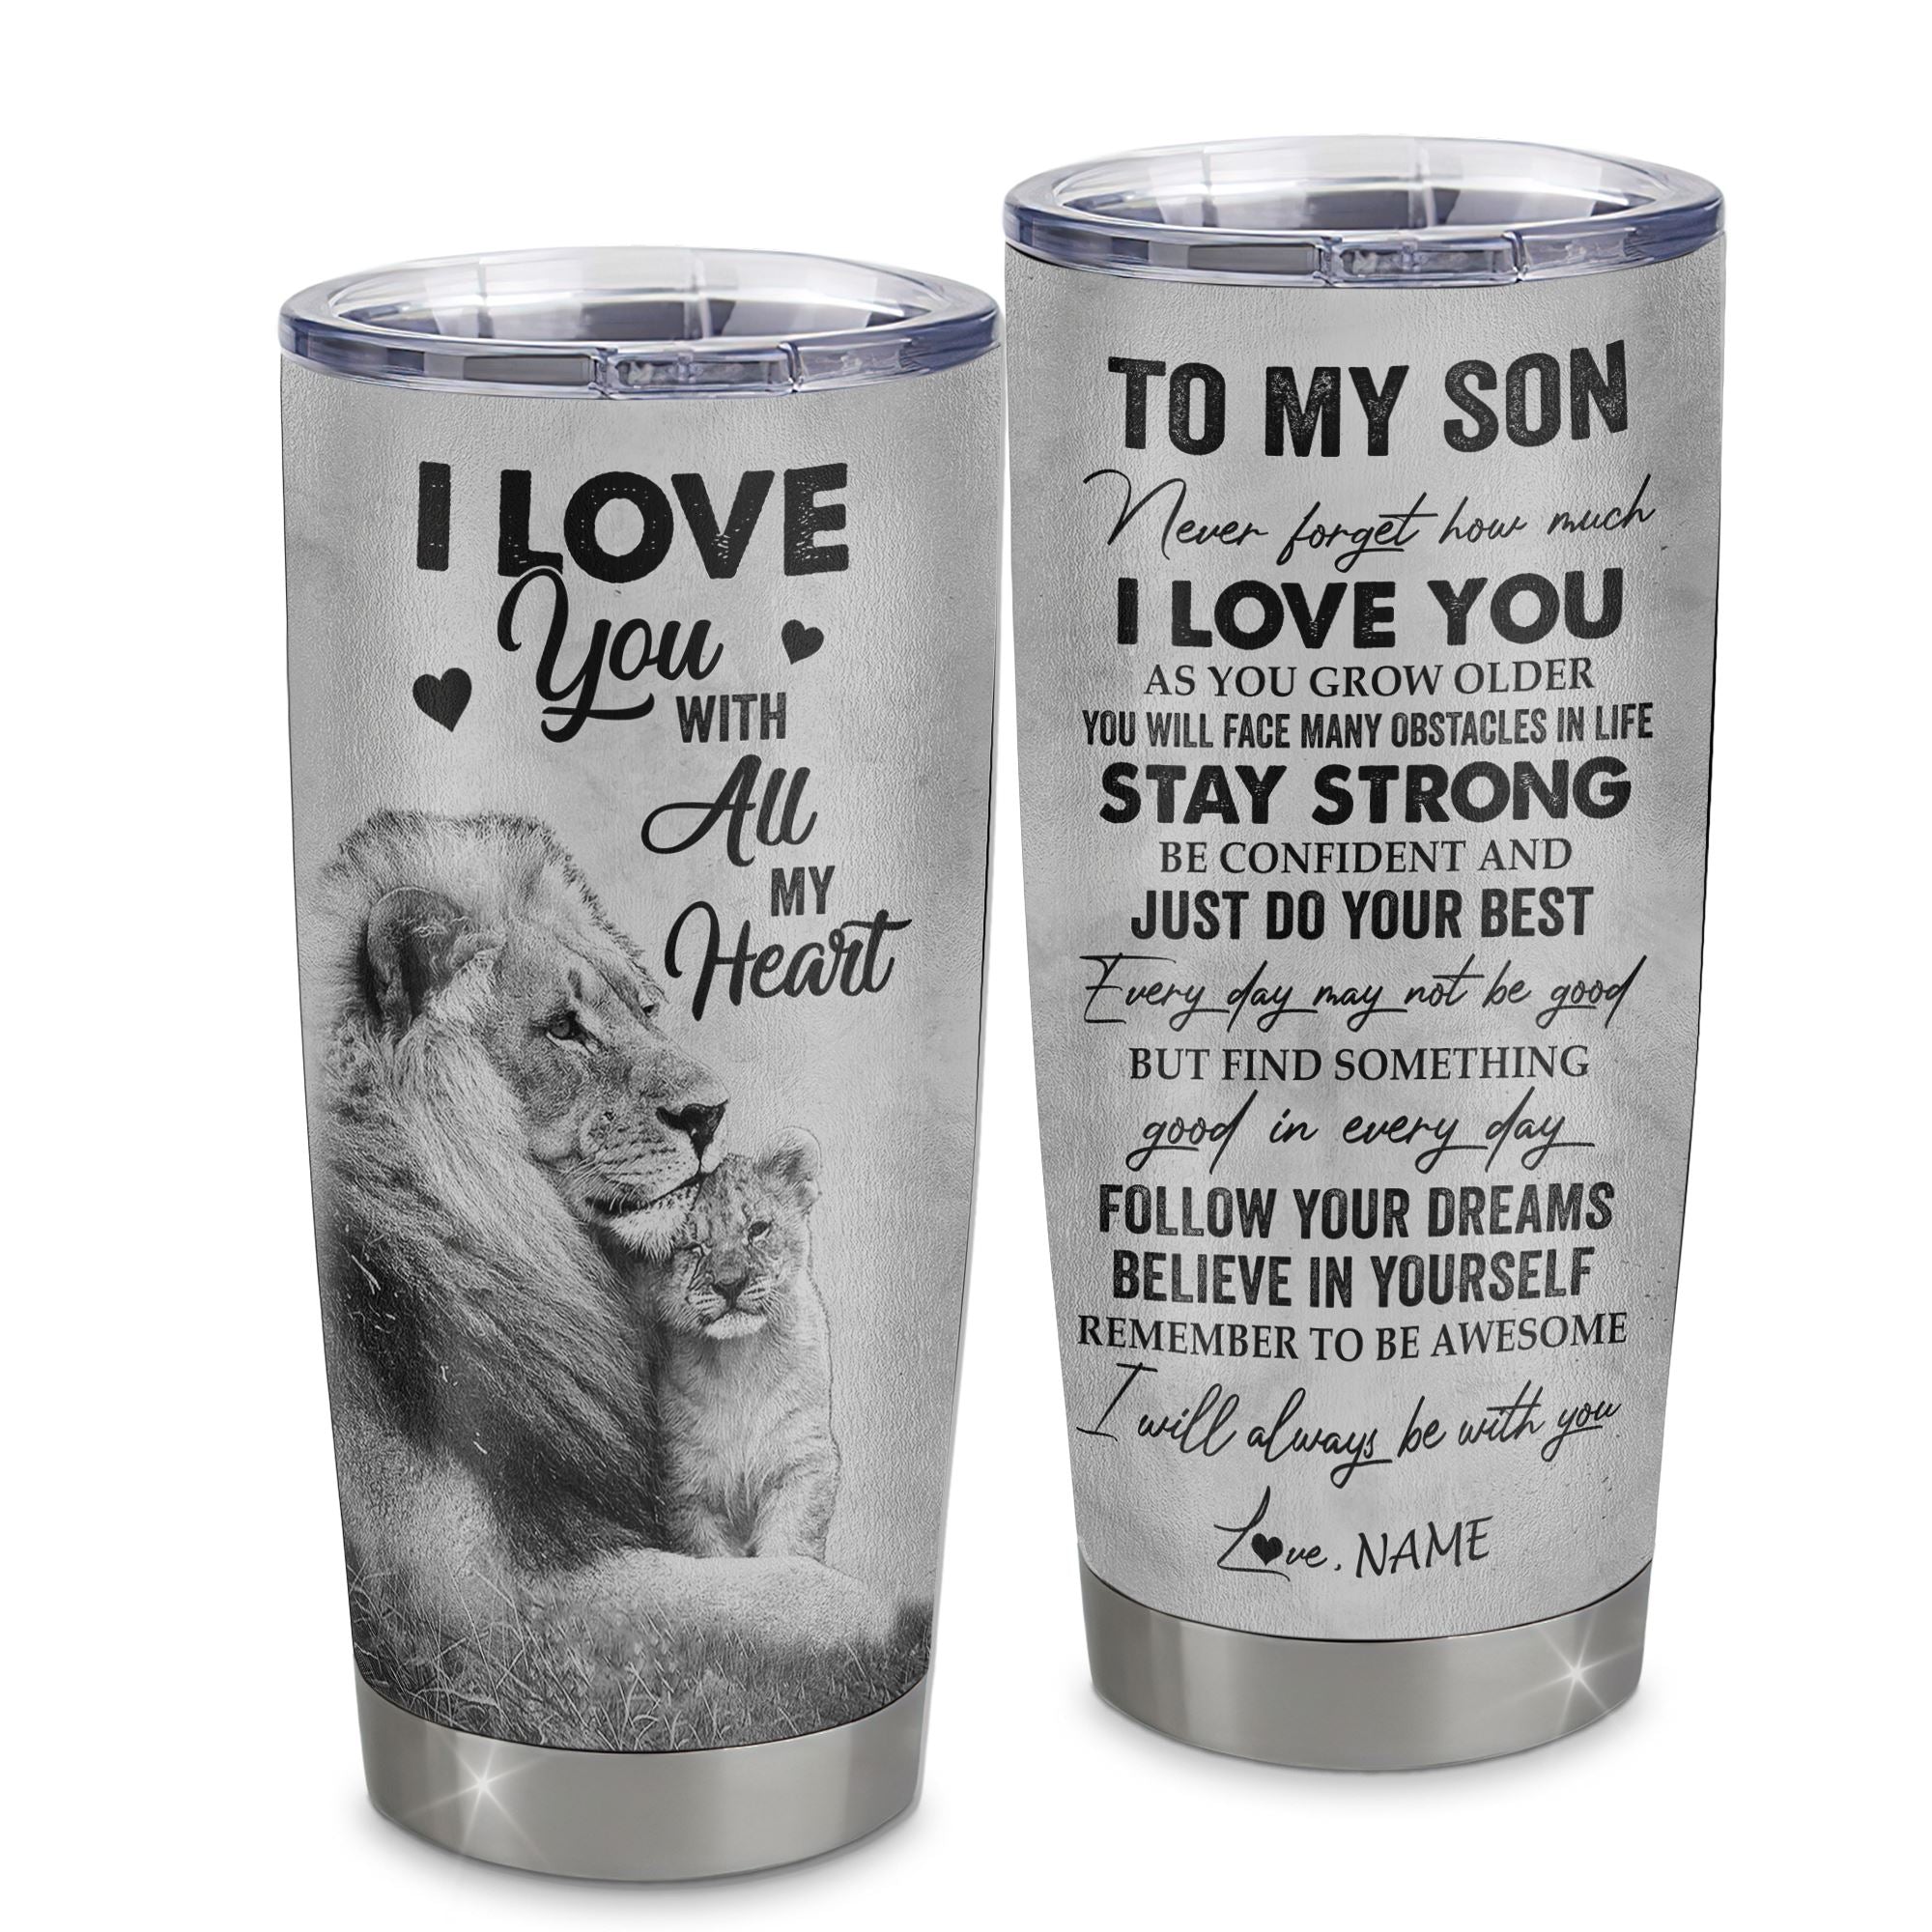 Personalized_To_My_Son_Tumbler_From_Dad_Father_Stainless_Steel_Cup_I_Love_You_With_All_My_Heart_Son_Birthday_Graduation_Christmas_Travel_Mug_Tumbler_mockup_1.jpg